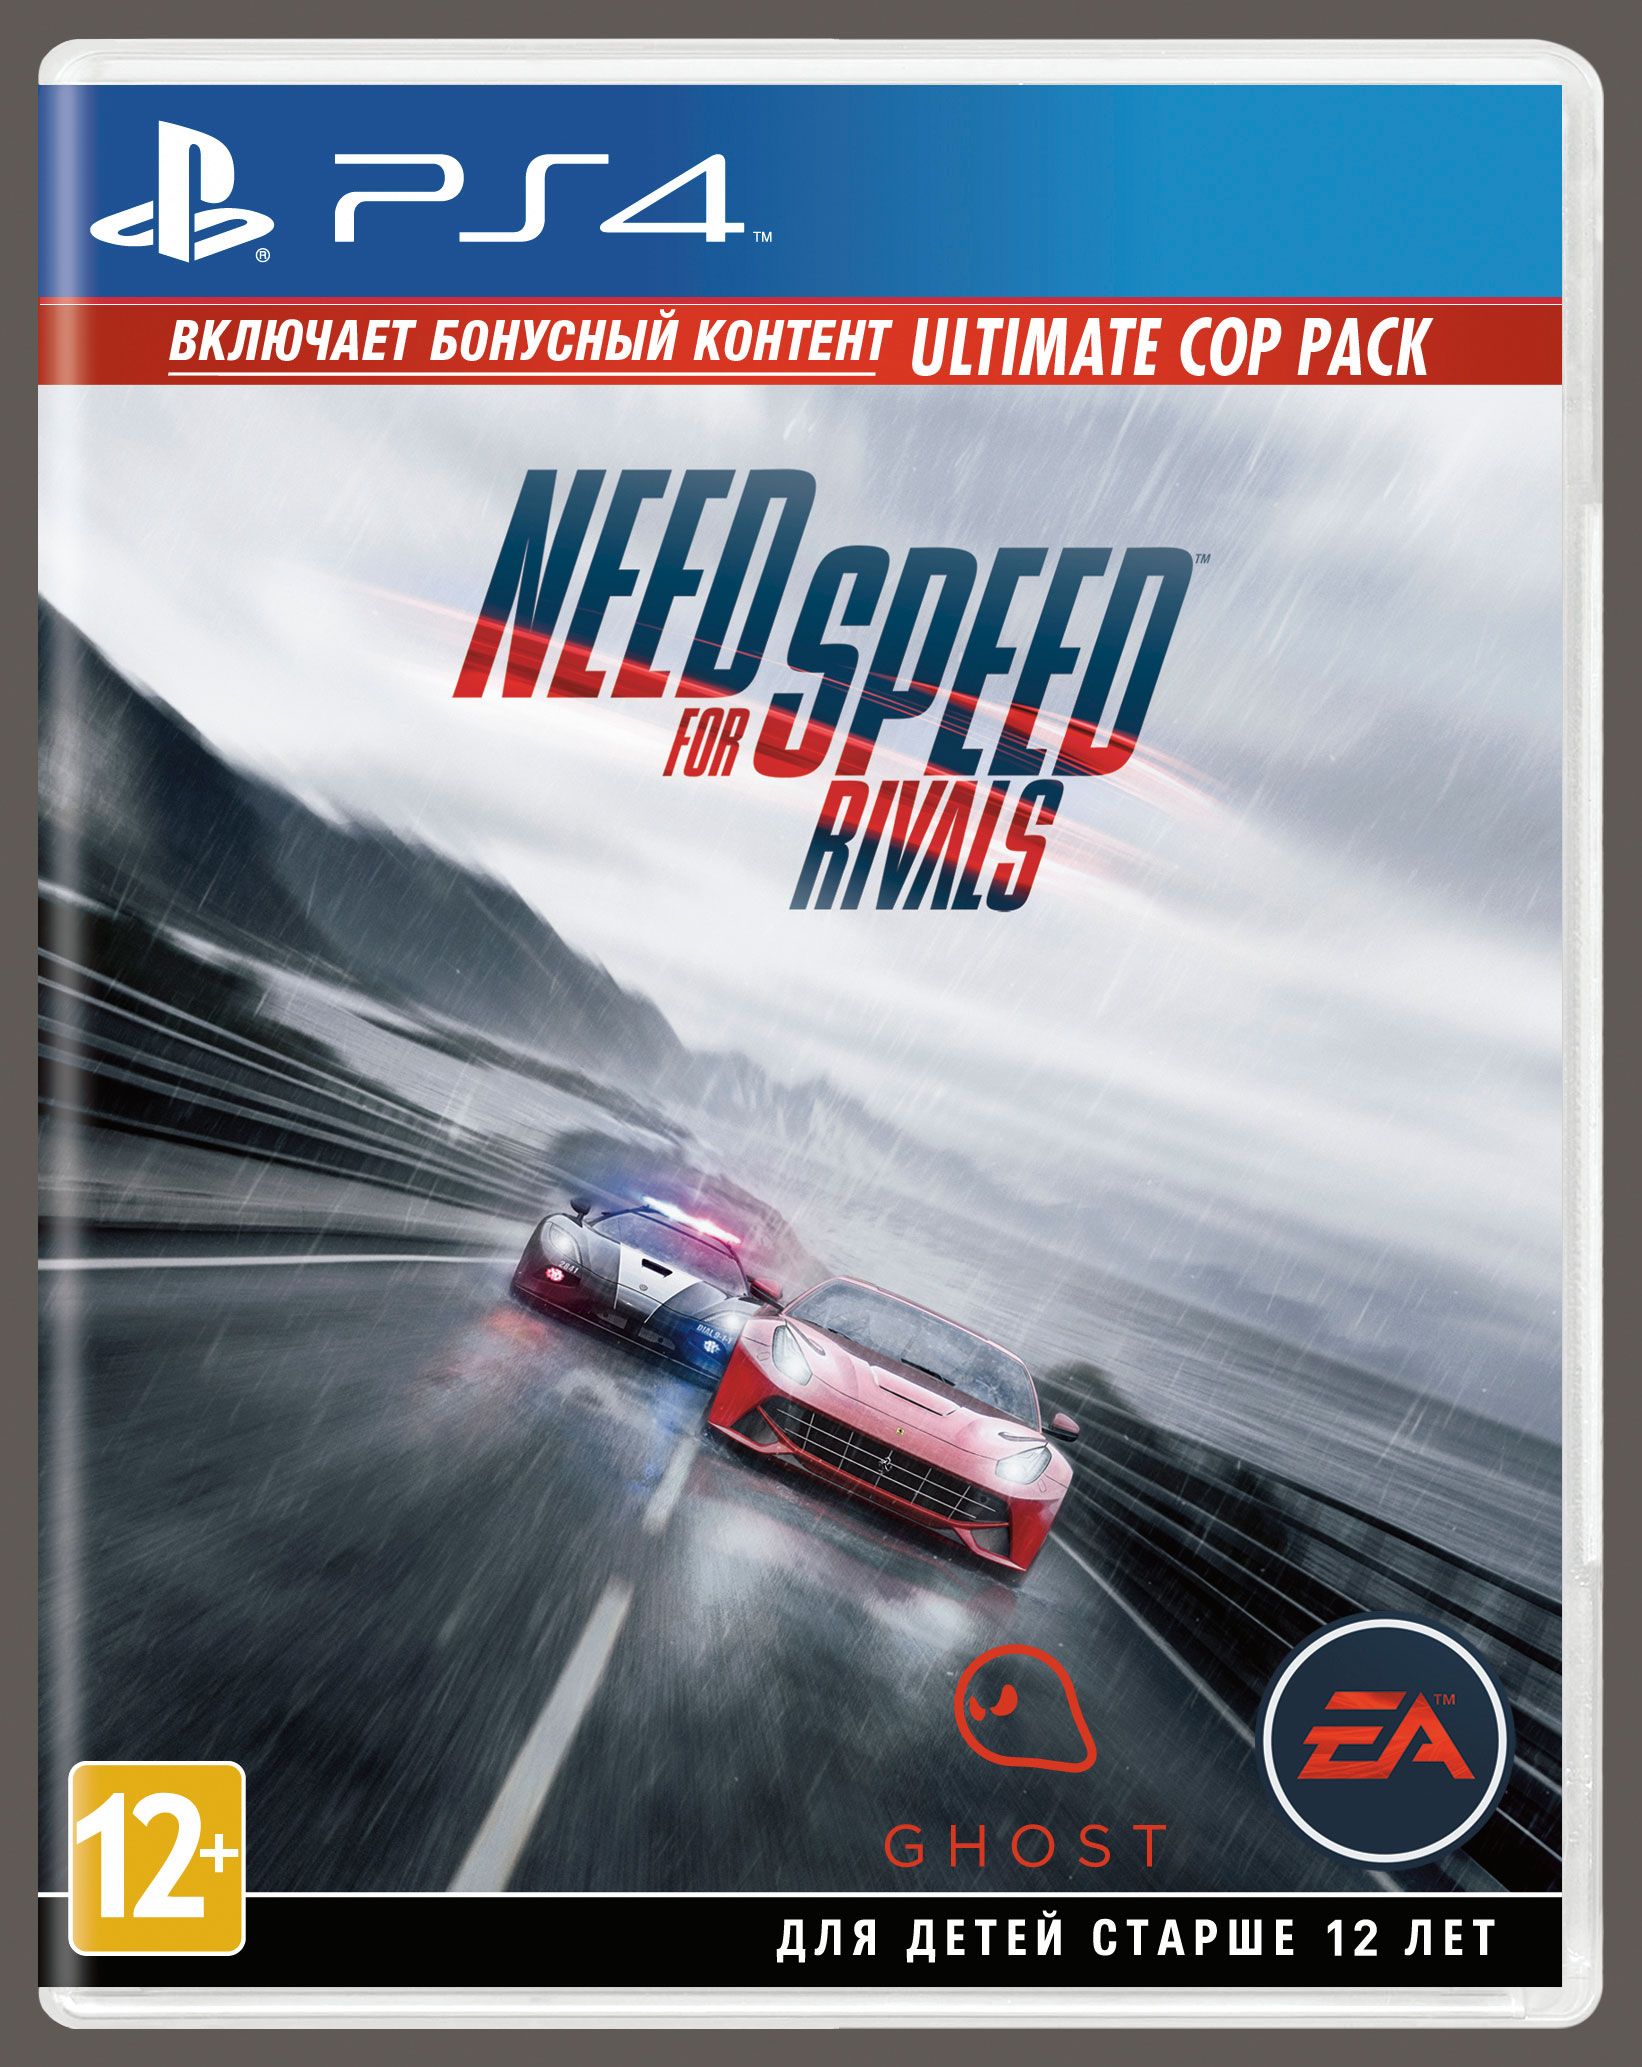 Rivals ps4. Need for Speed ps4 диск. Игра need for Speed:Rivals(ps4). Need for Speed (ps4). Need for Speed Rivals (ps4).